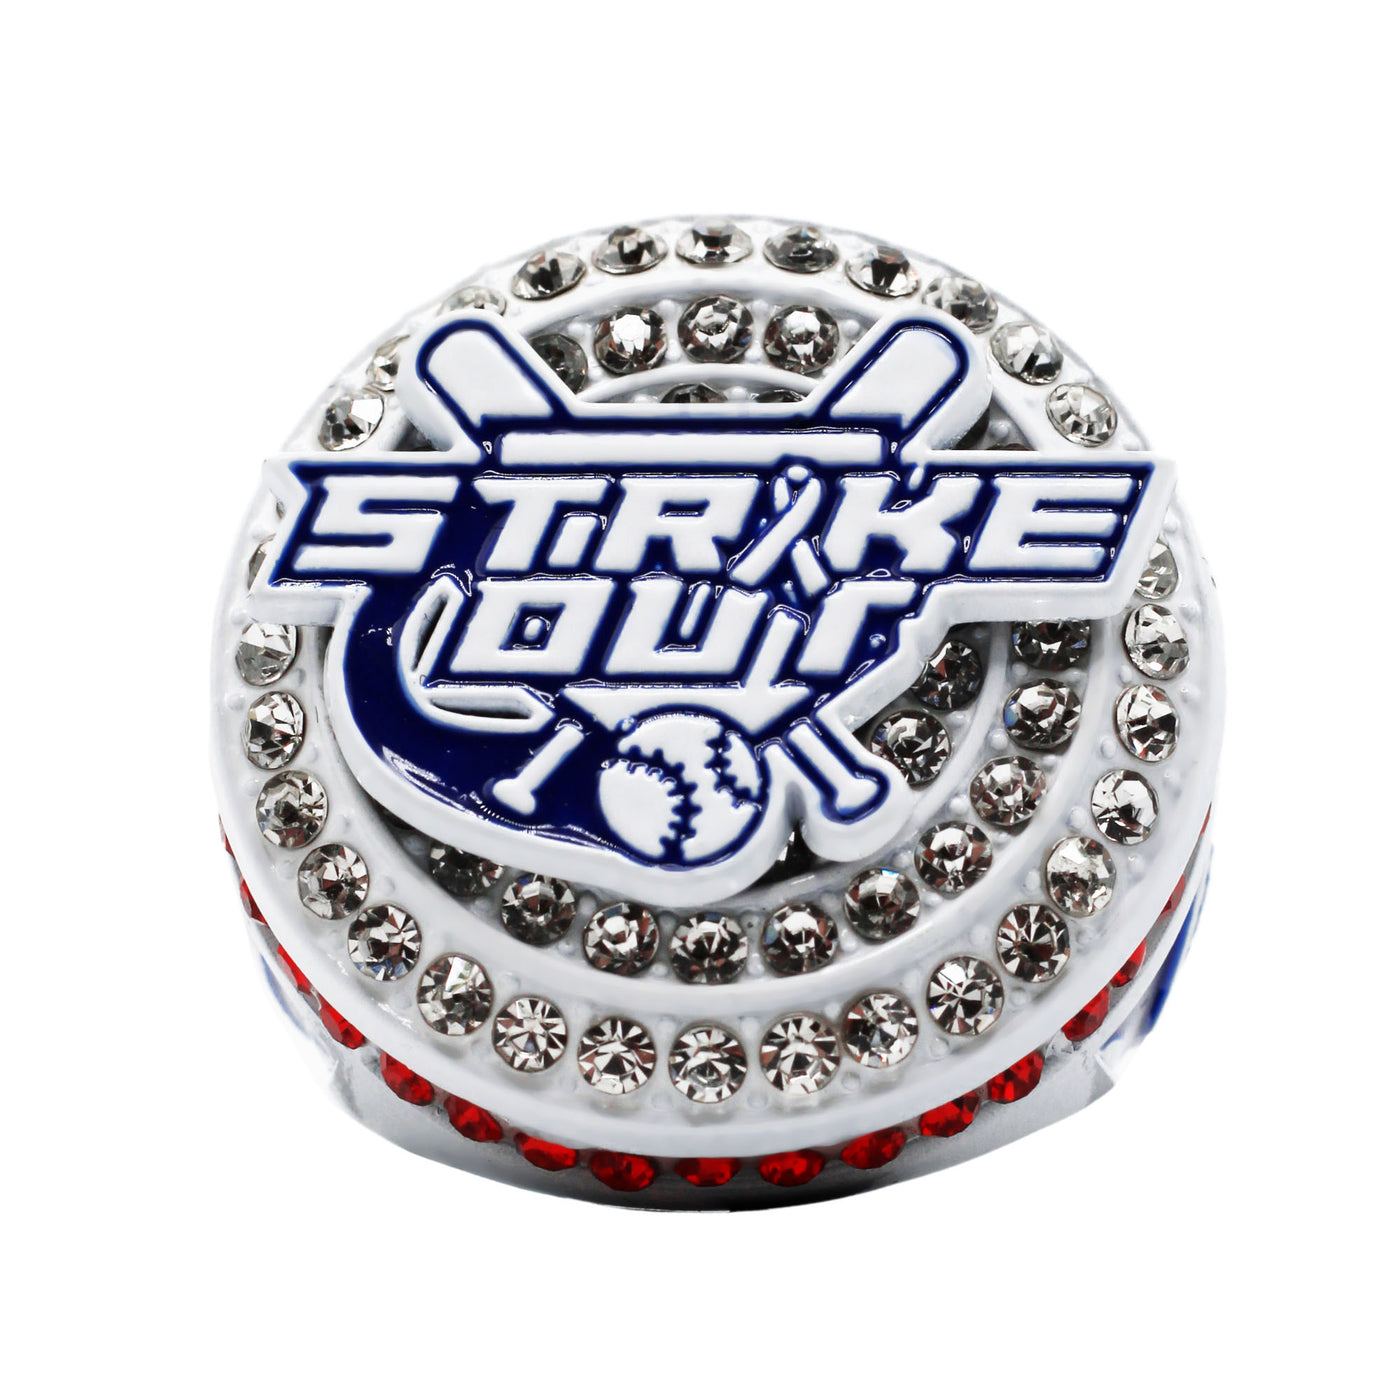 STRIKEOUT 4 CANCER WHITEOUT RING